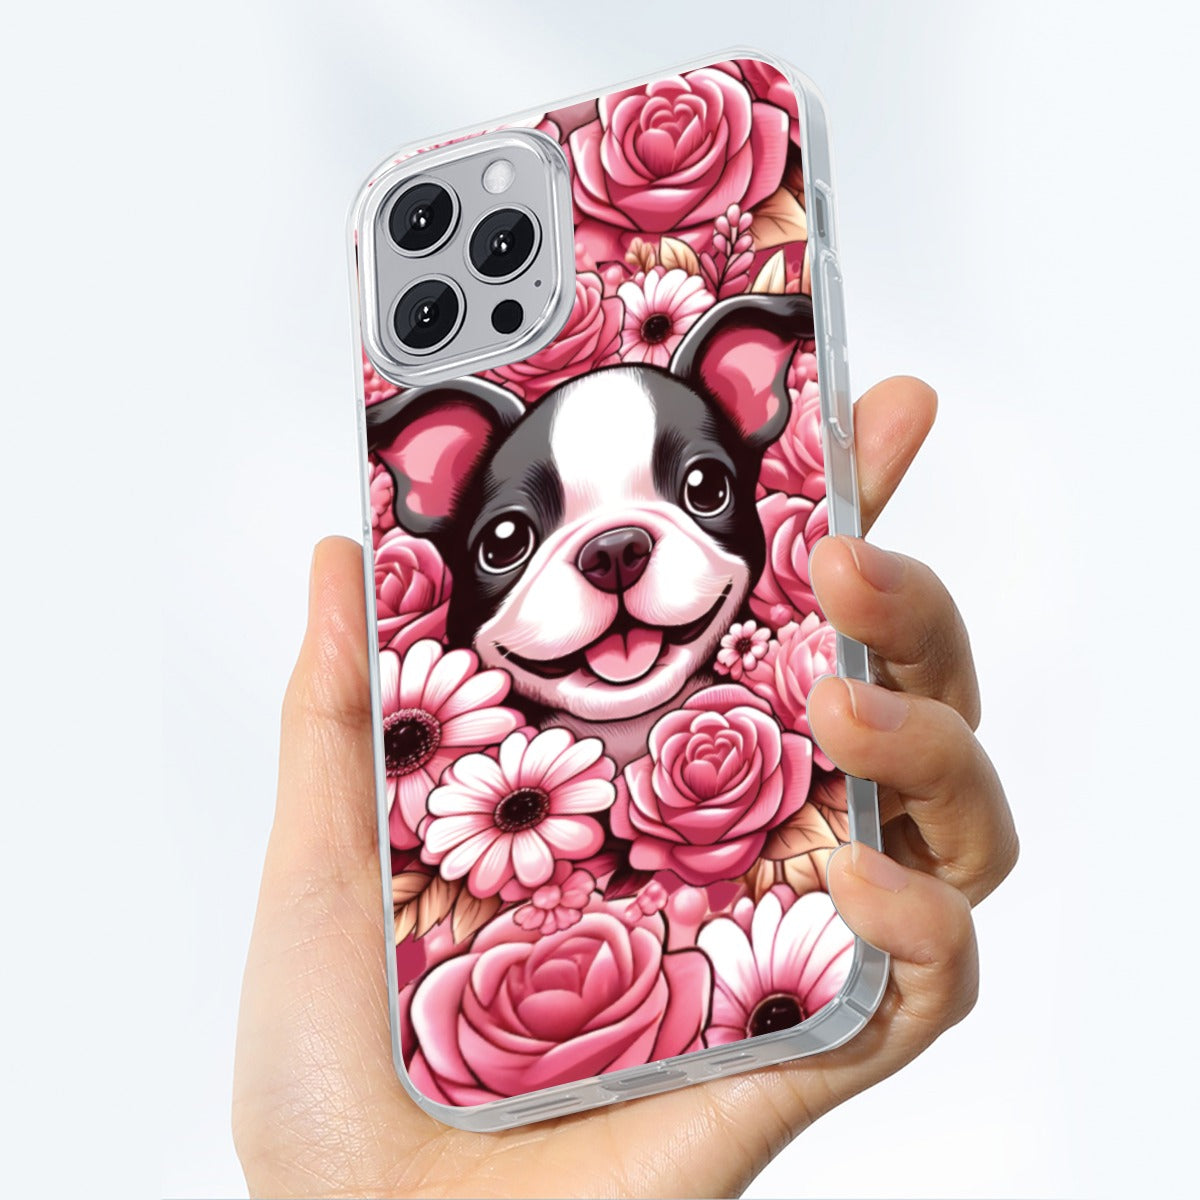 Daisy - iPhone case for Boston Terrier lovers